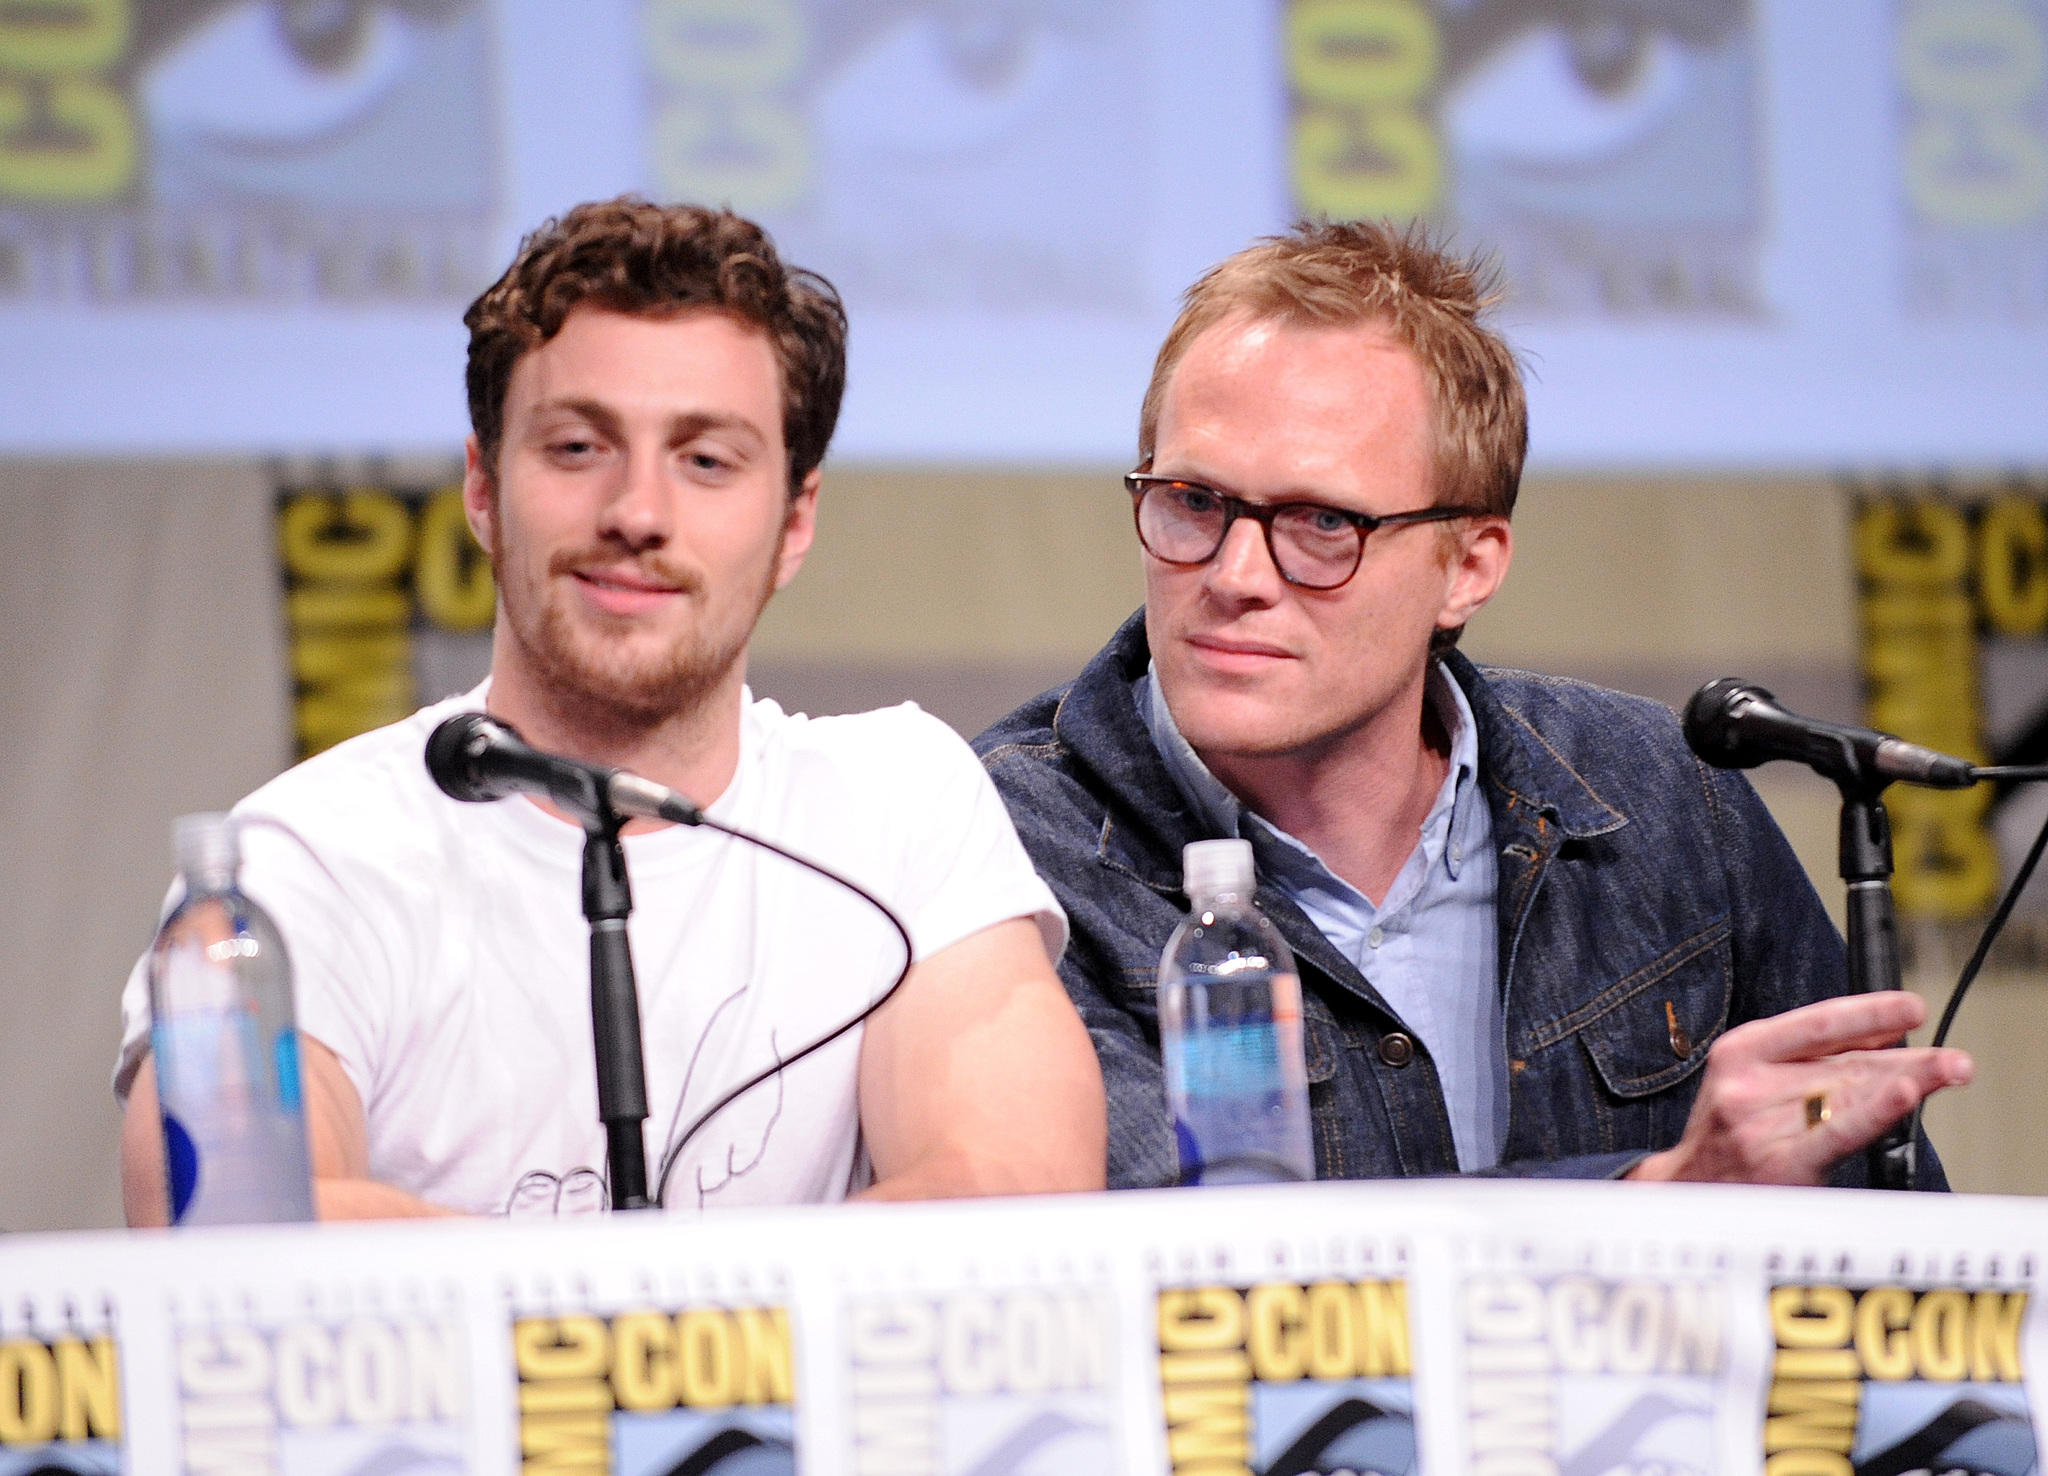 Paul Bettany and Aaron Taylor-Johnson